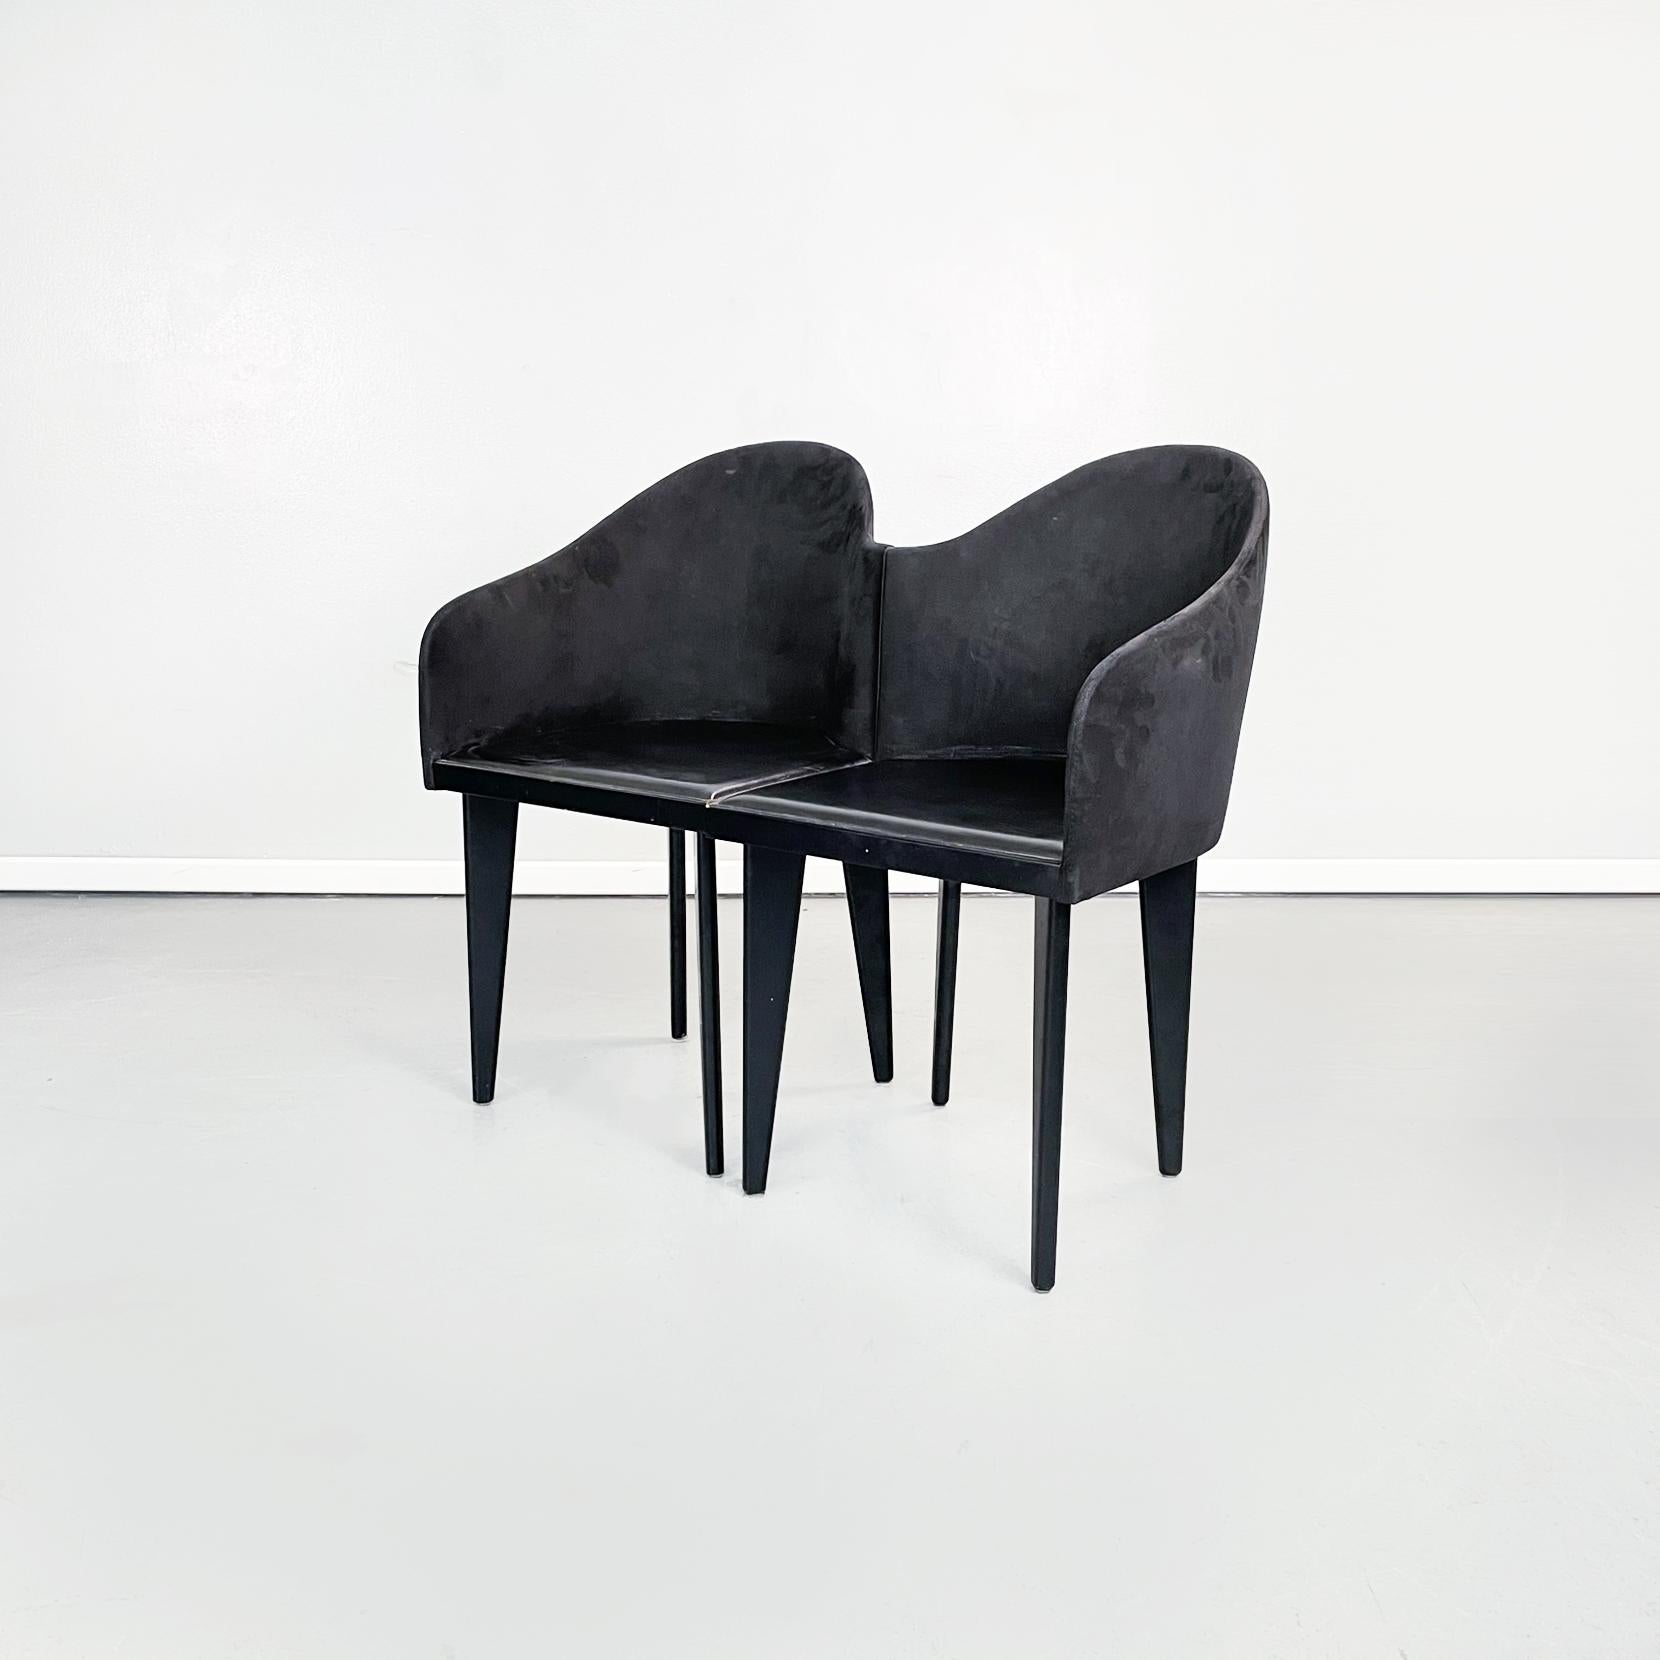 Italian modern Black chairs Toscana by Sartogo and Grenon for Saporiti, 1980s
Set of 4 chairs mod. Toscana with square seat in black synthetic leather. The back, which extends on two sides, has a sinuous curvature, with a wooden structure and